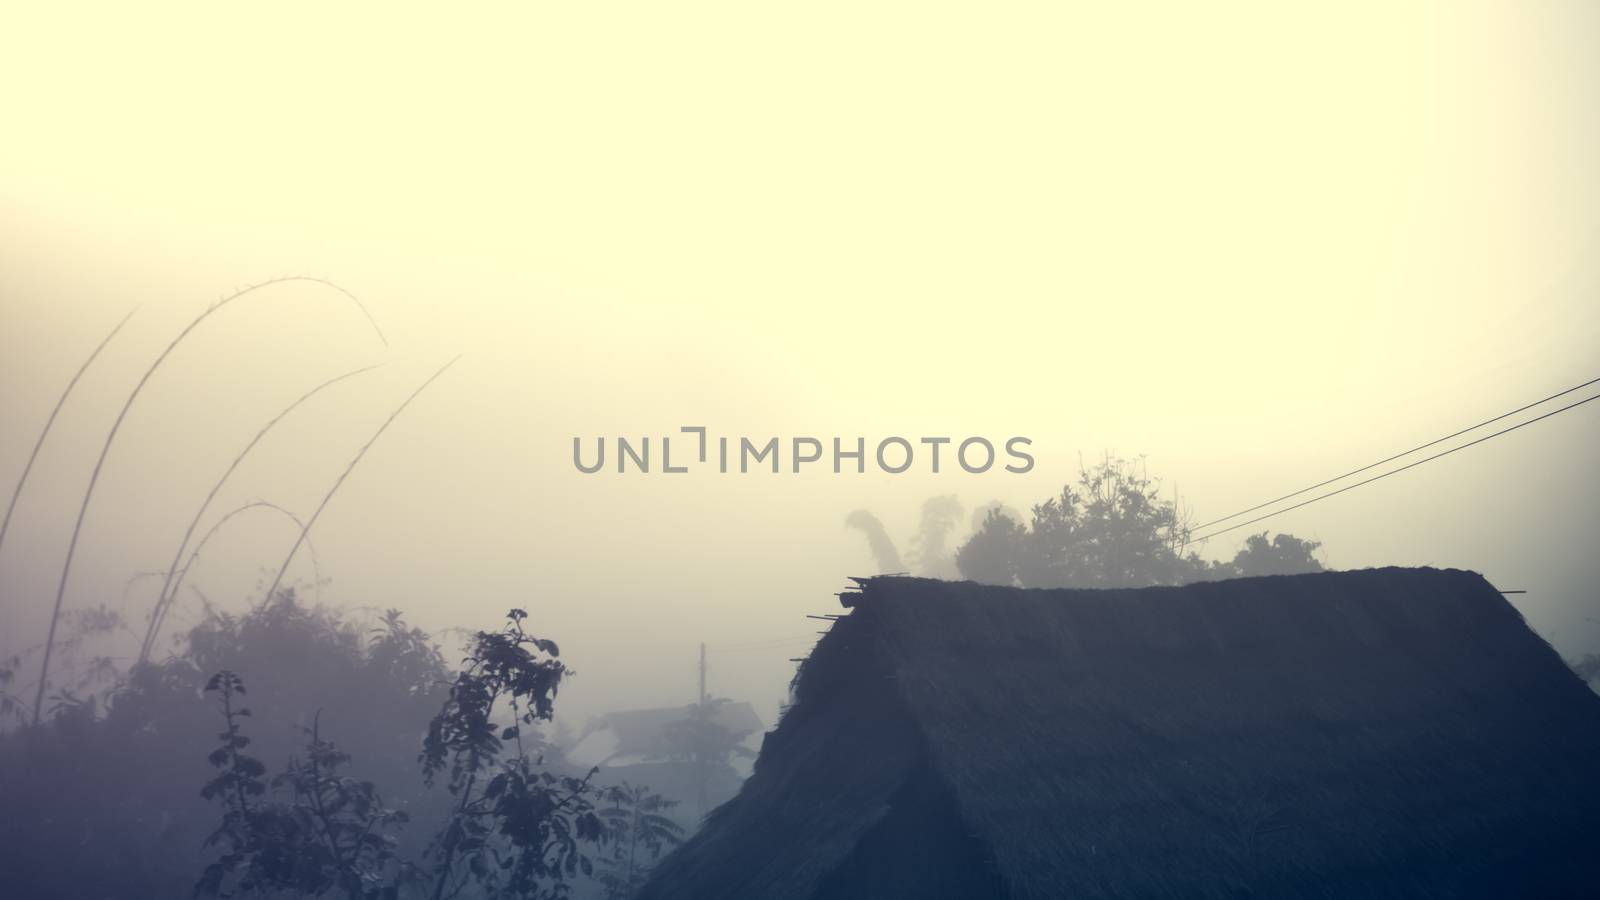 Cottage in the village among mountain and fog